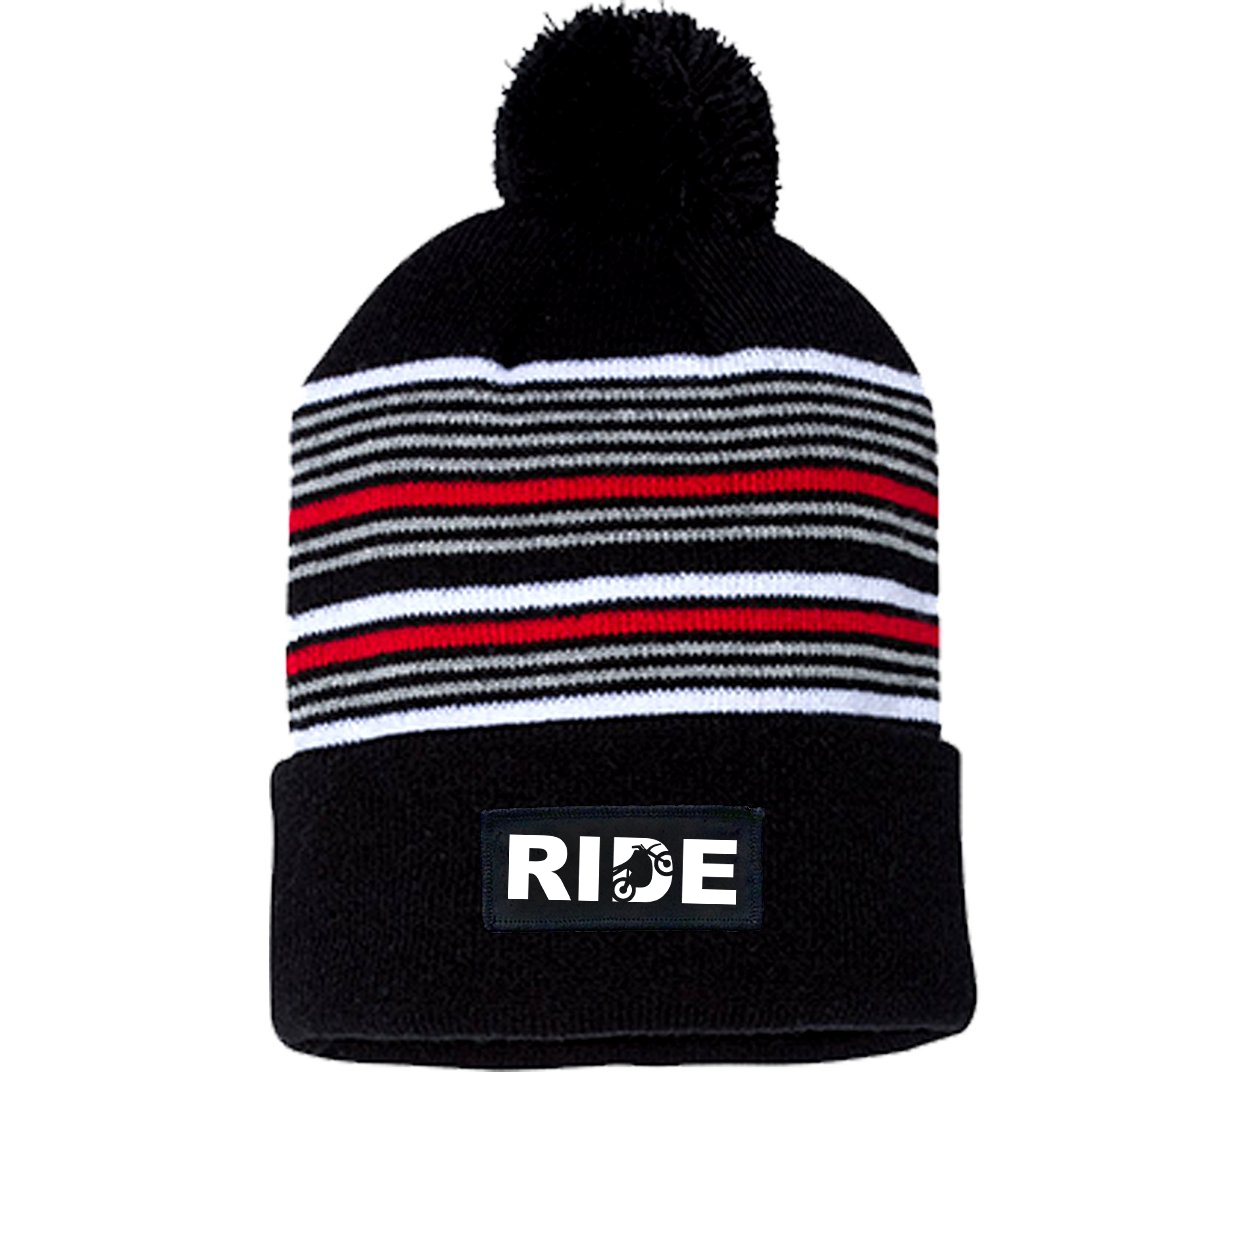 Ride Moto Logo Night Out Woven Patch Roll Up Pom Knit Beanie Black/ White/ Grey/ Red Beanie (White Logo)